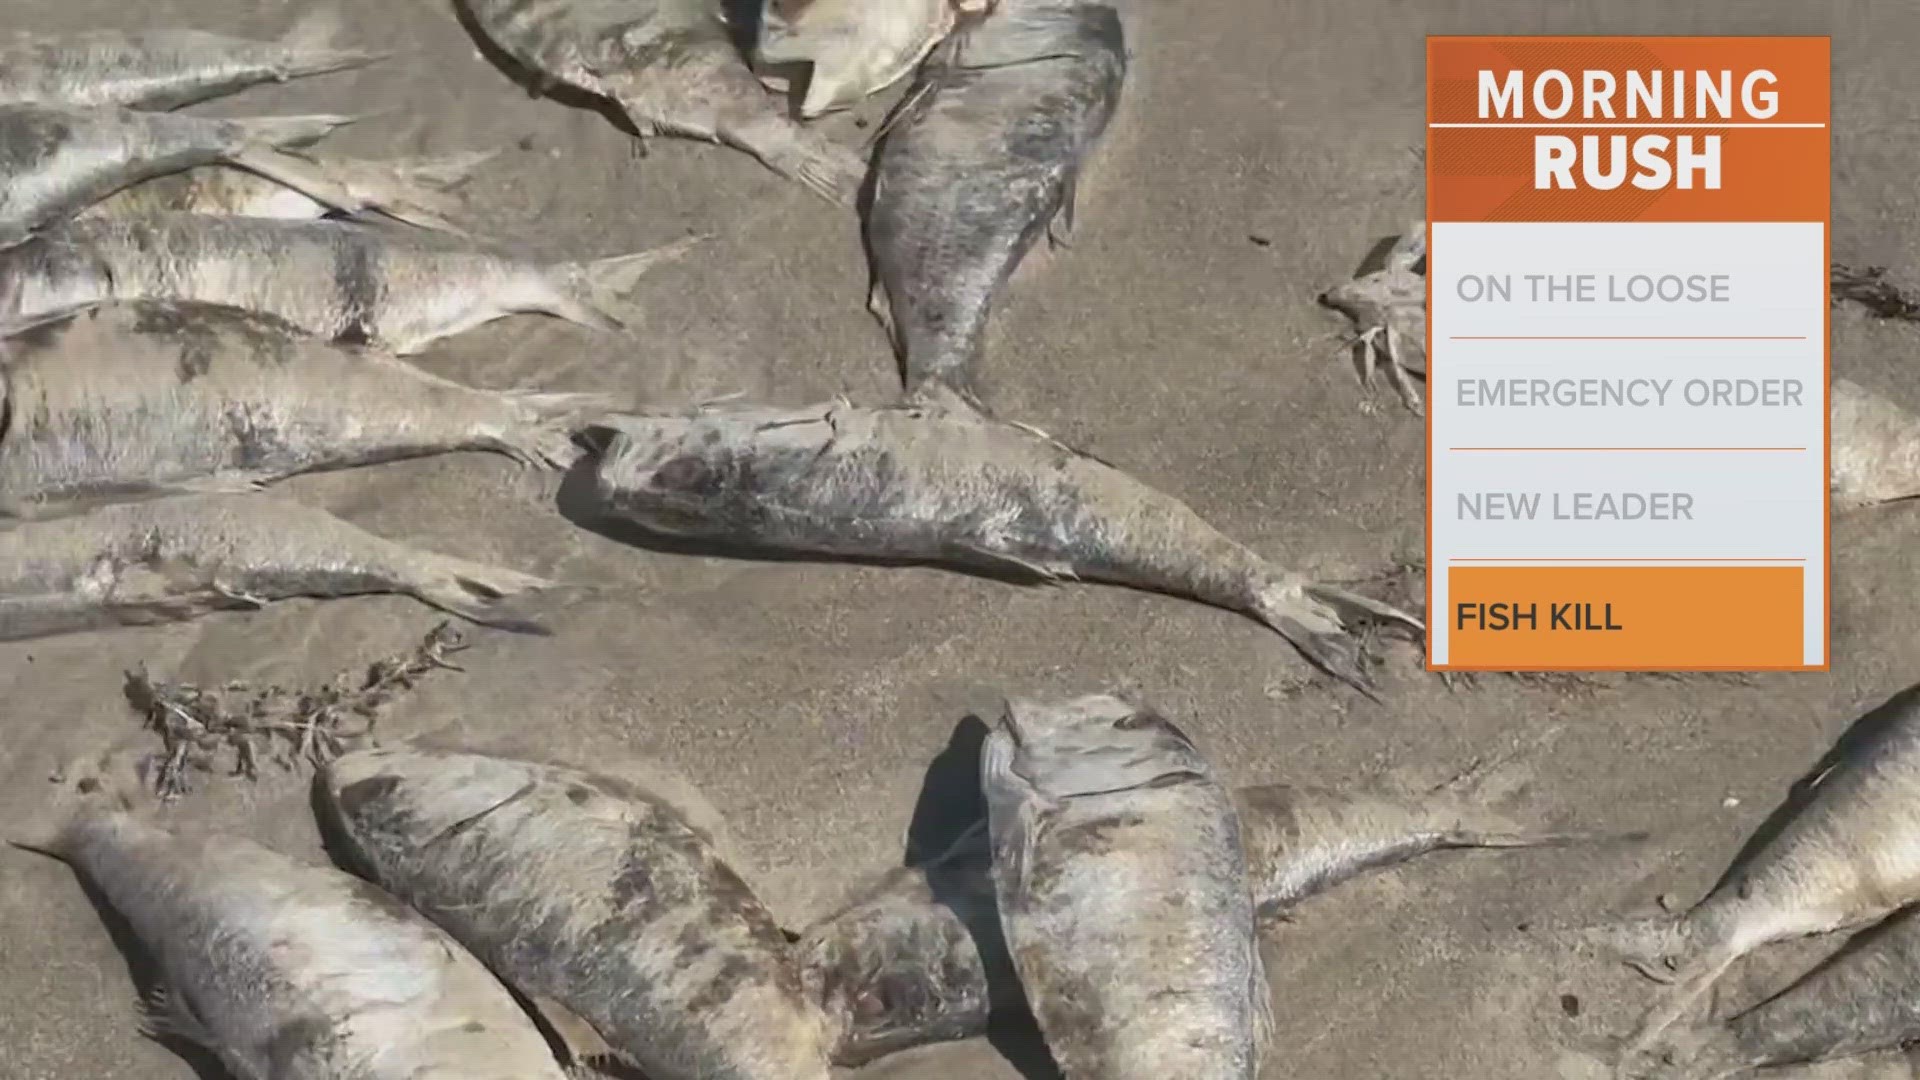 In June, the oxygen levels of the Gulf of Mexico dropped, causing a lot of fish to die.